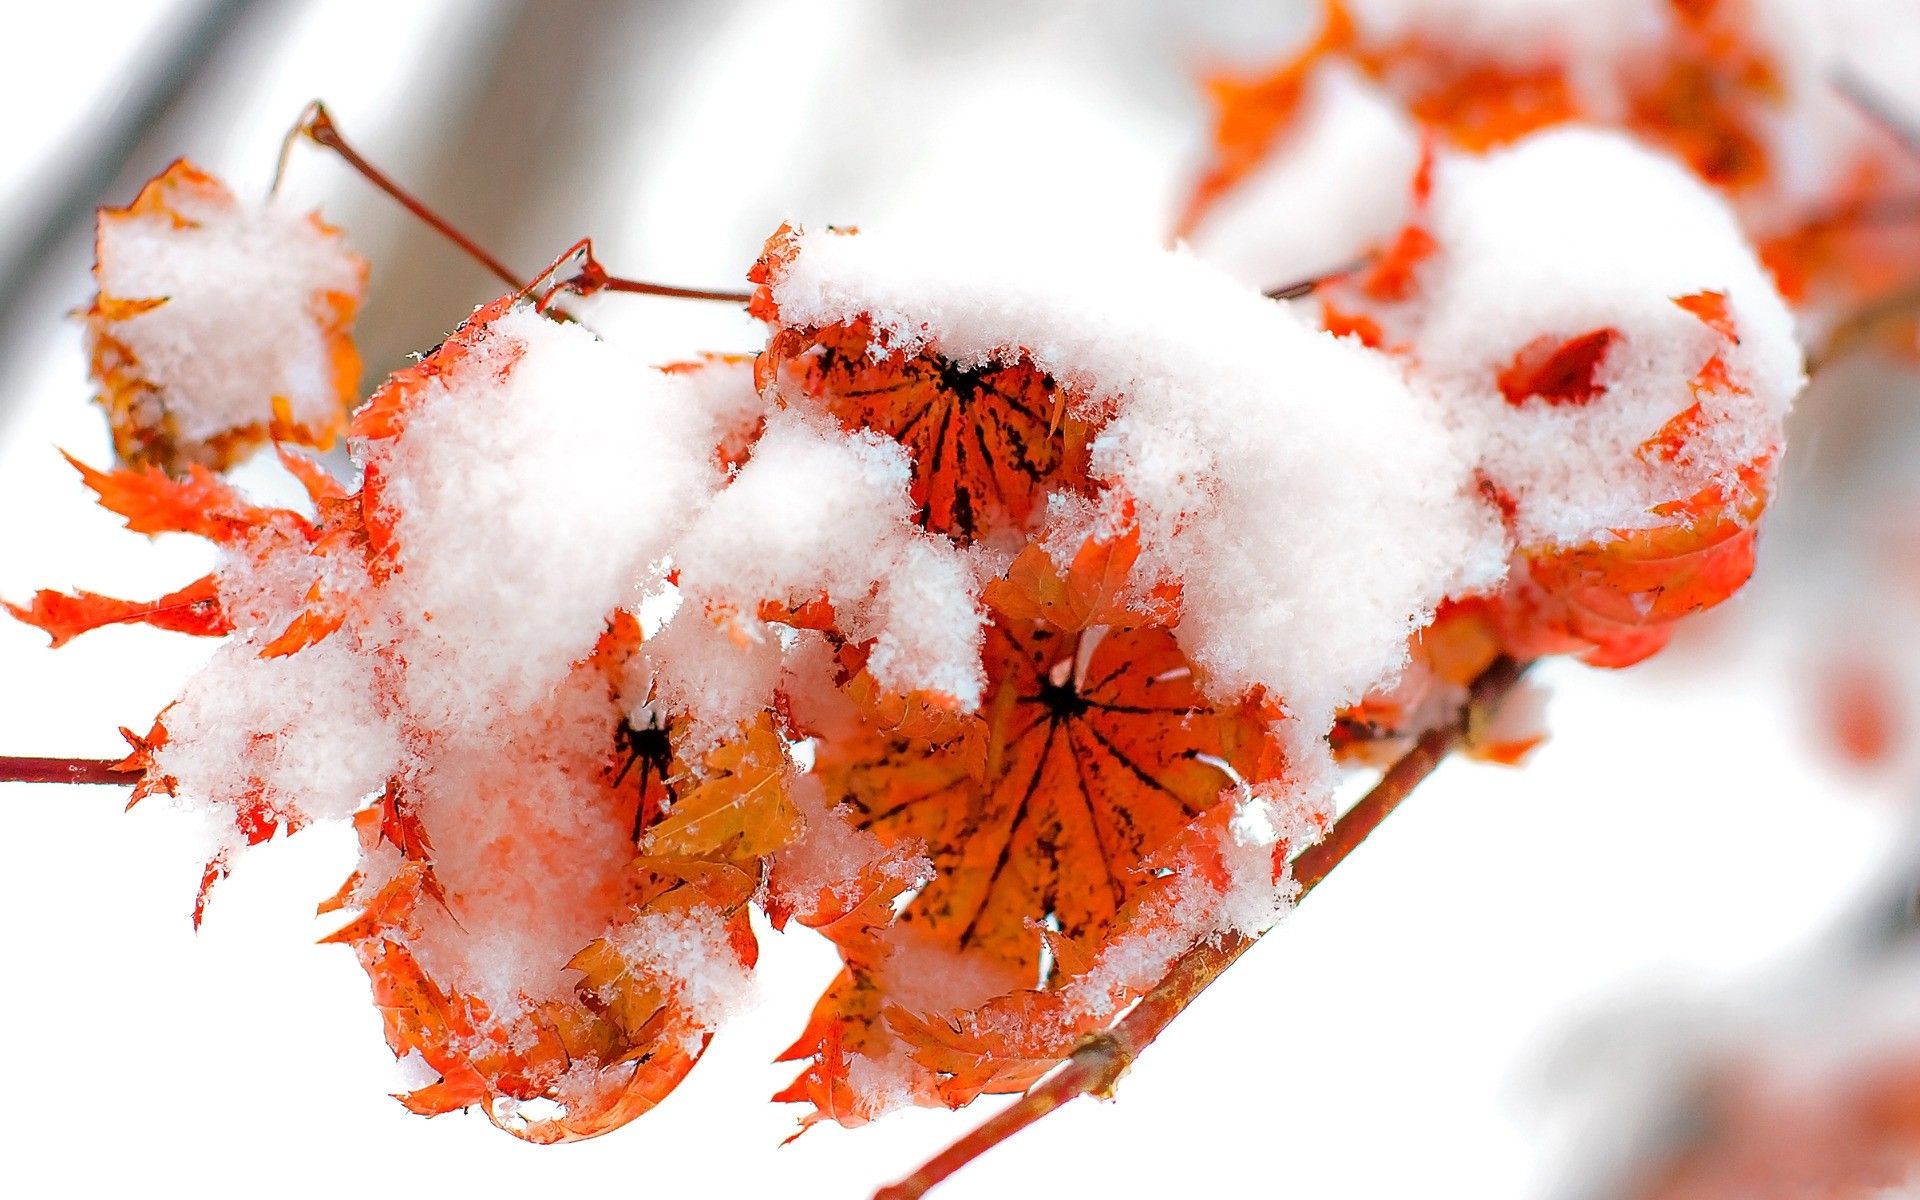 ice, Nature, Winter, Snow, Leaf, Autumn, Red, Orange, Leaves, Cold, Frozen Wallpaper HD / Desktop and Mobile Background